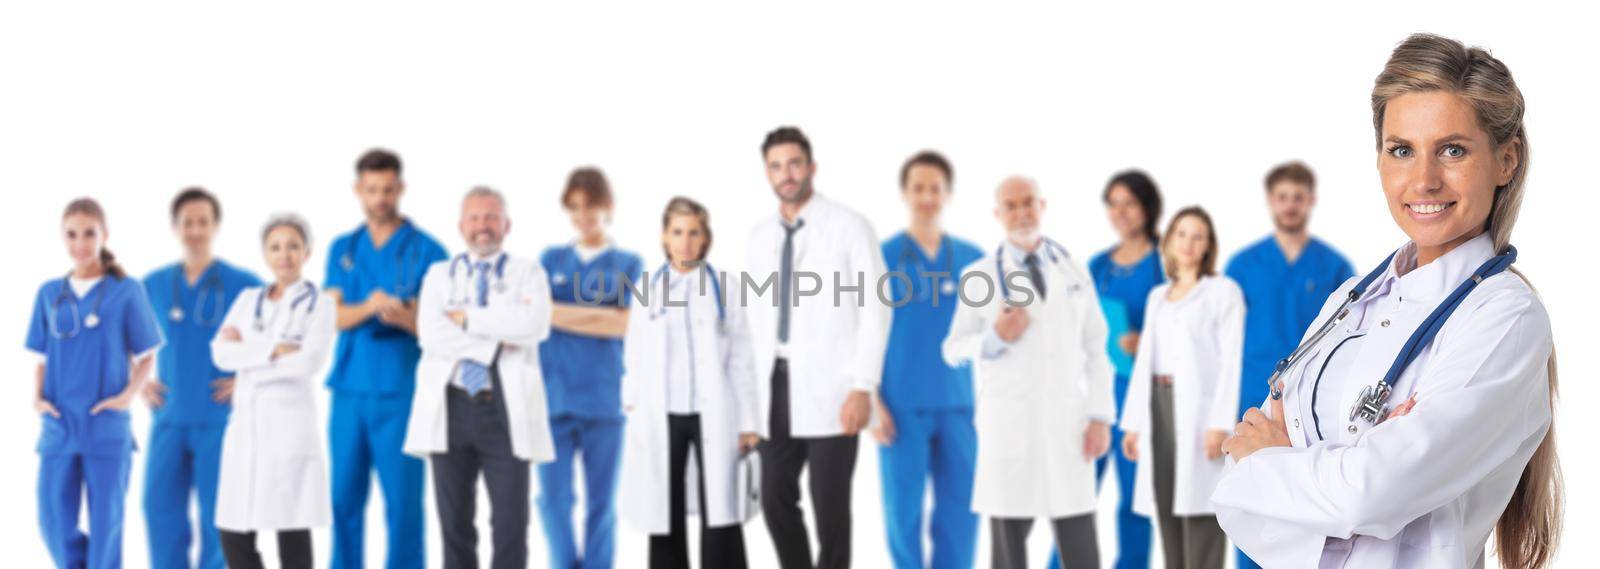 Group portrait of medical and female leader doctor workers isolated on white background, doctors, nurses in uniform